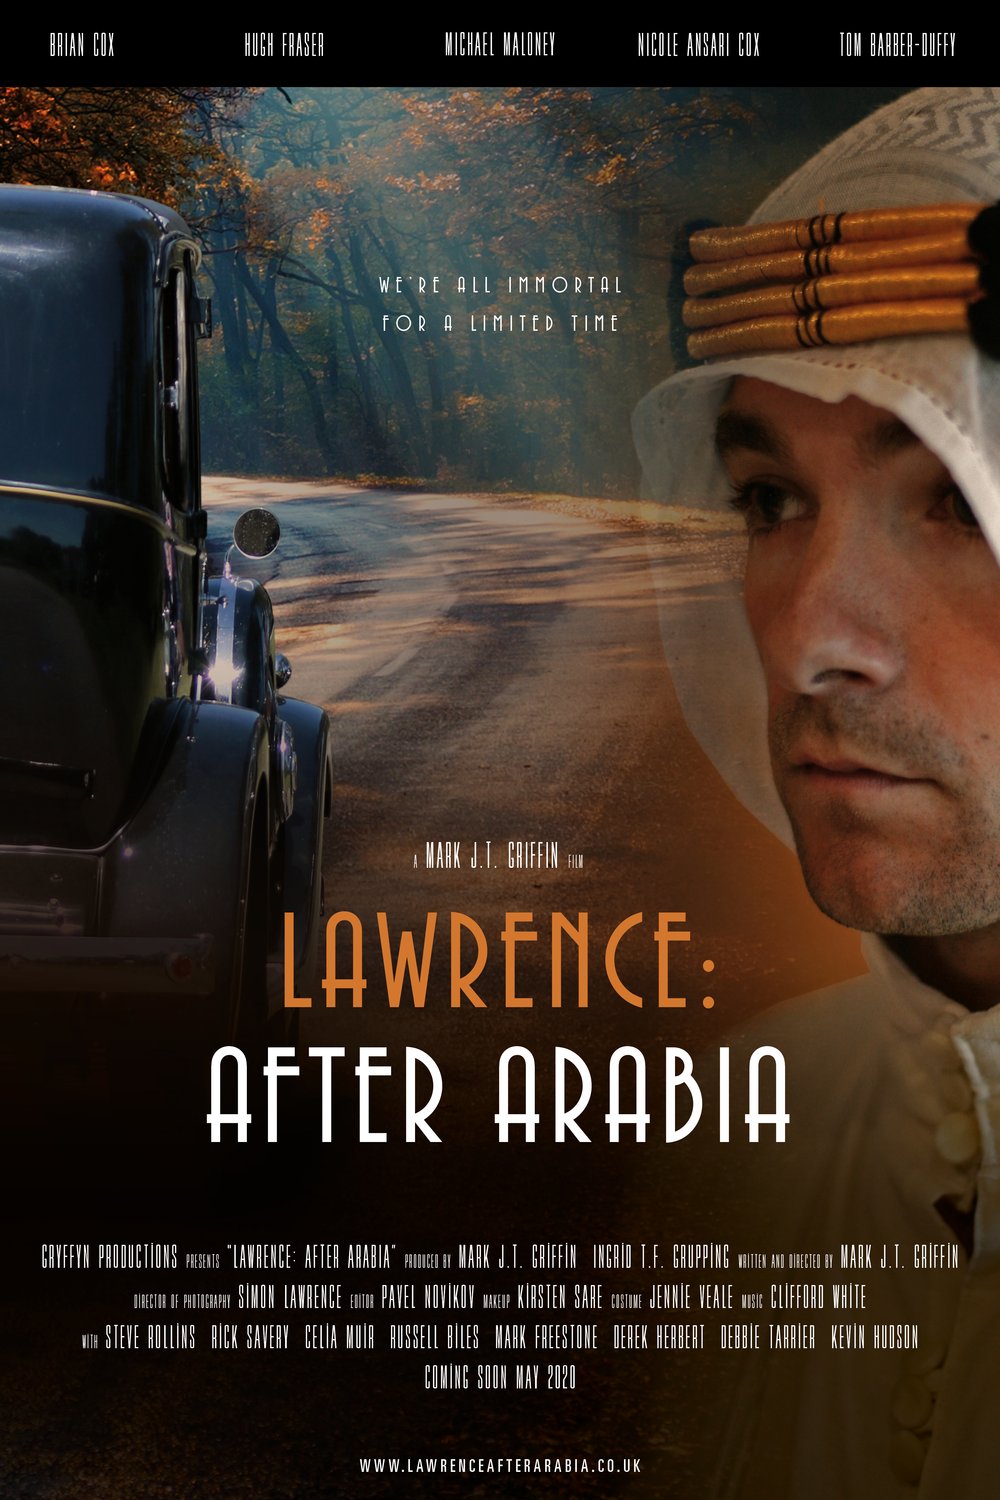 Poster of the movie Lawrence: After Arabia